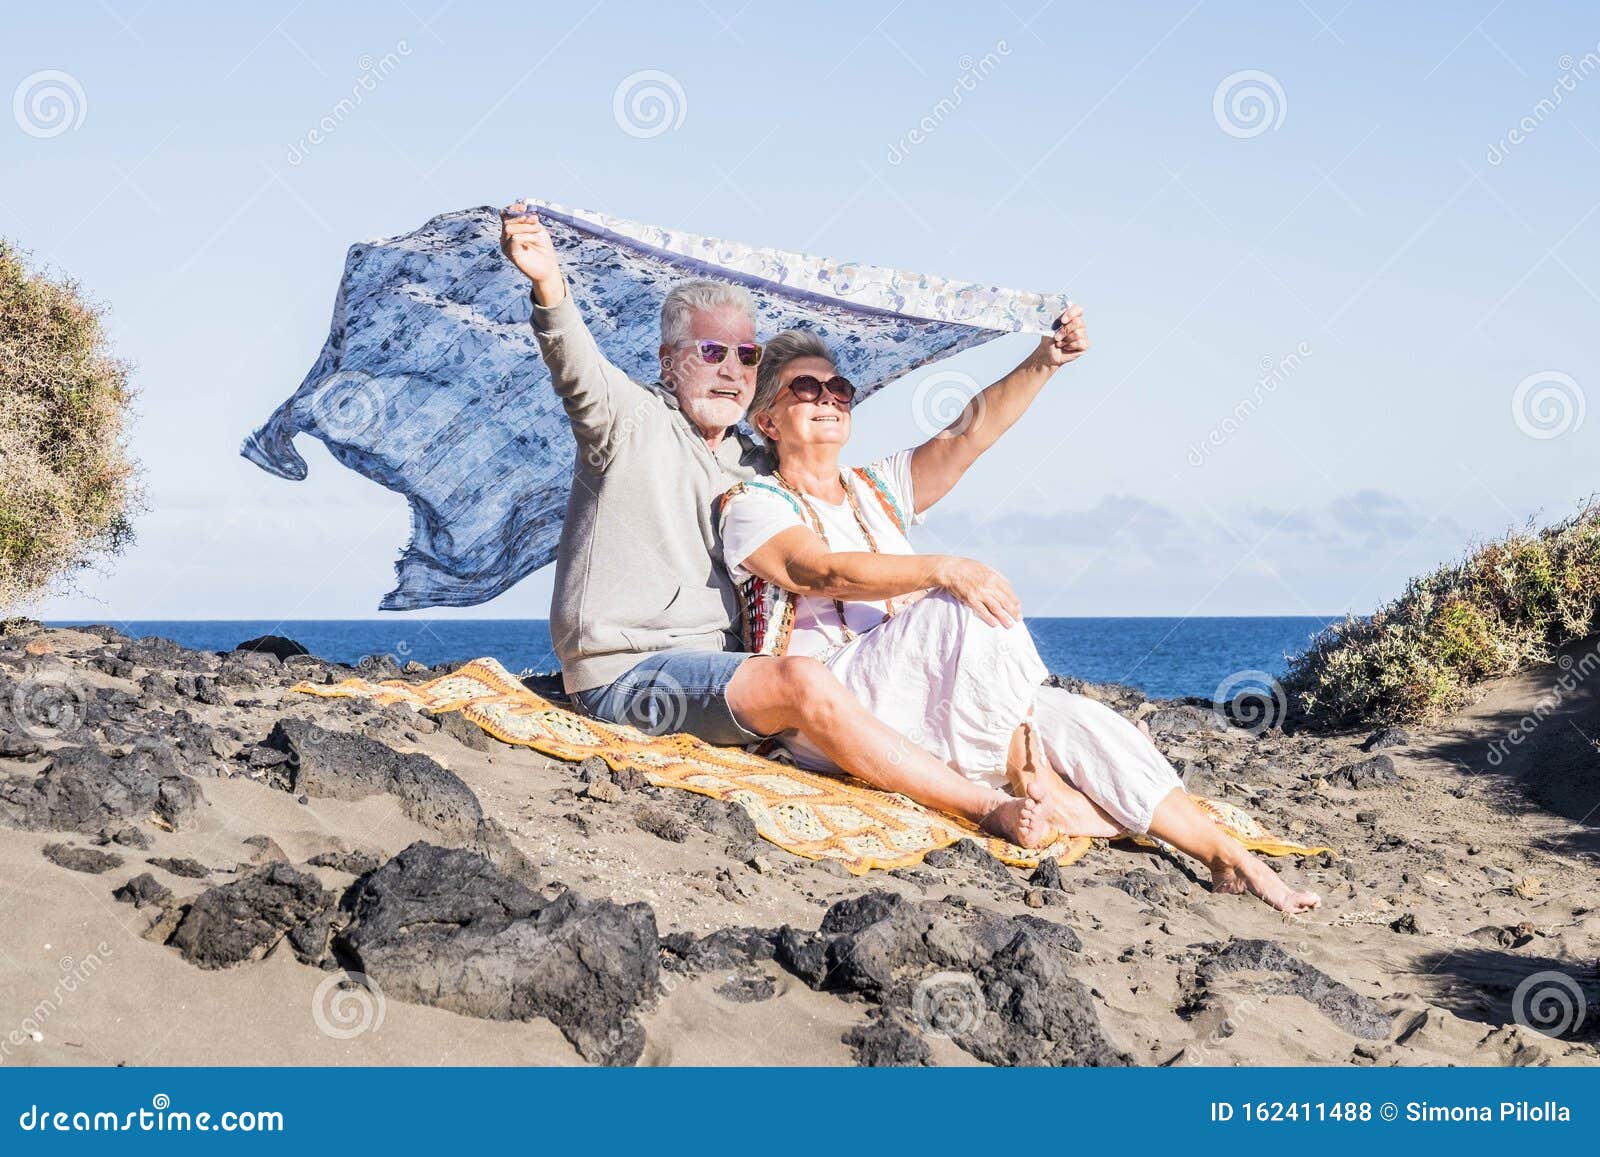 Interesting in nature's garb couple on the beach